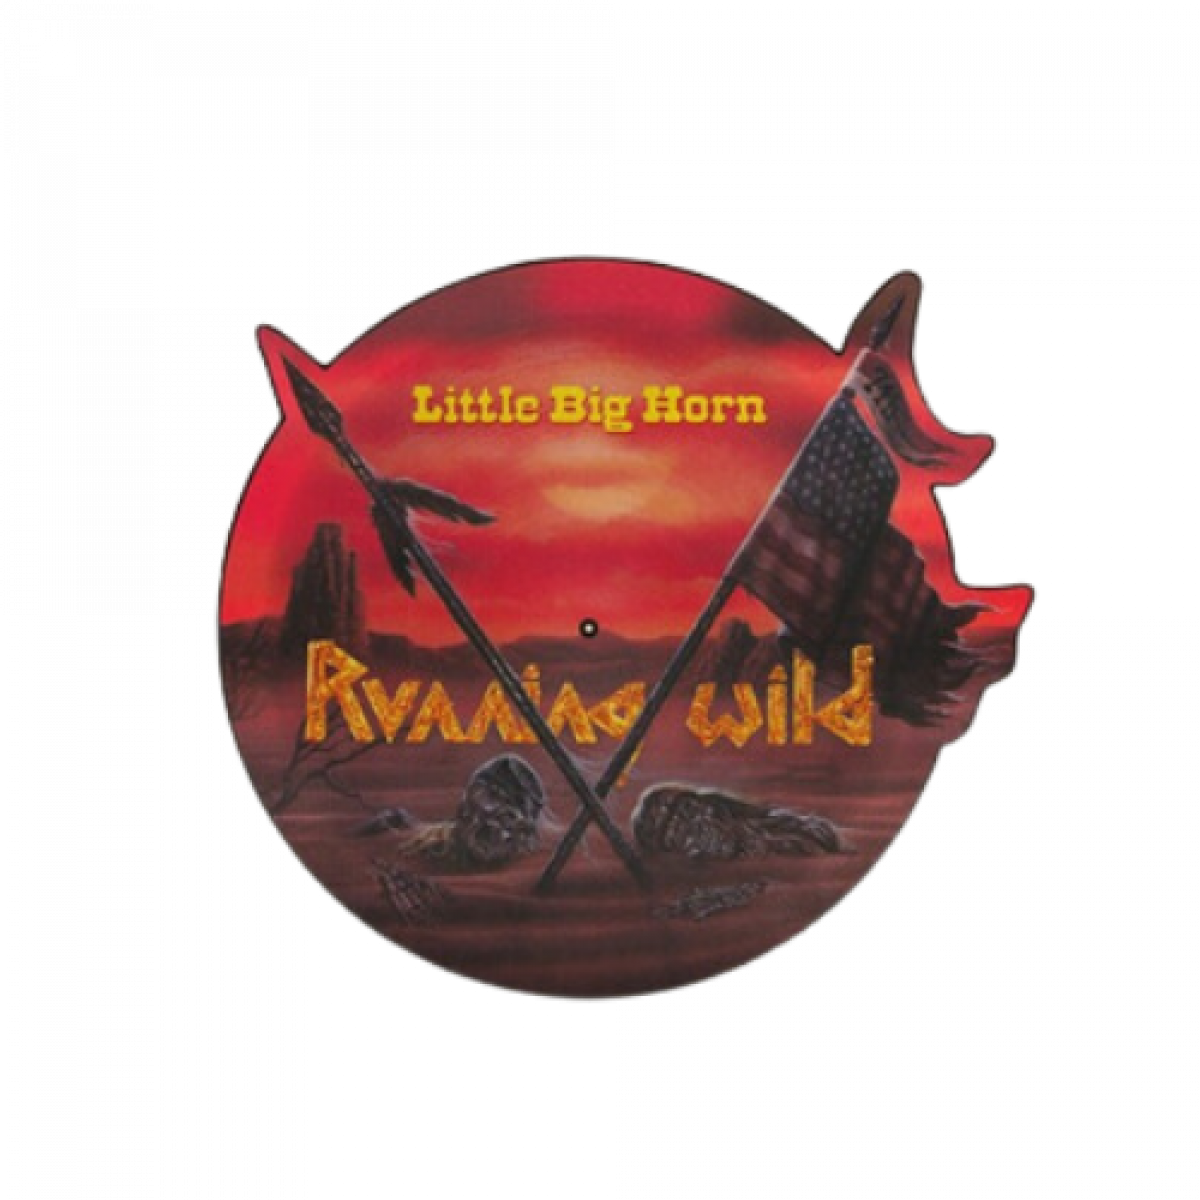 Little Bug Horn Limited Edition Shaped Picture DISC